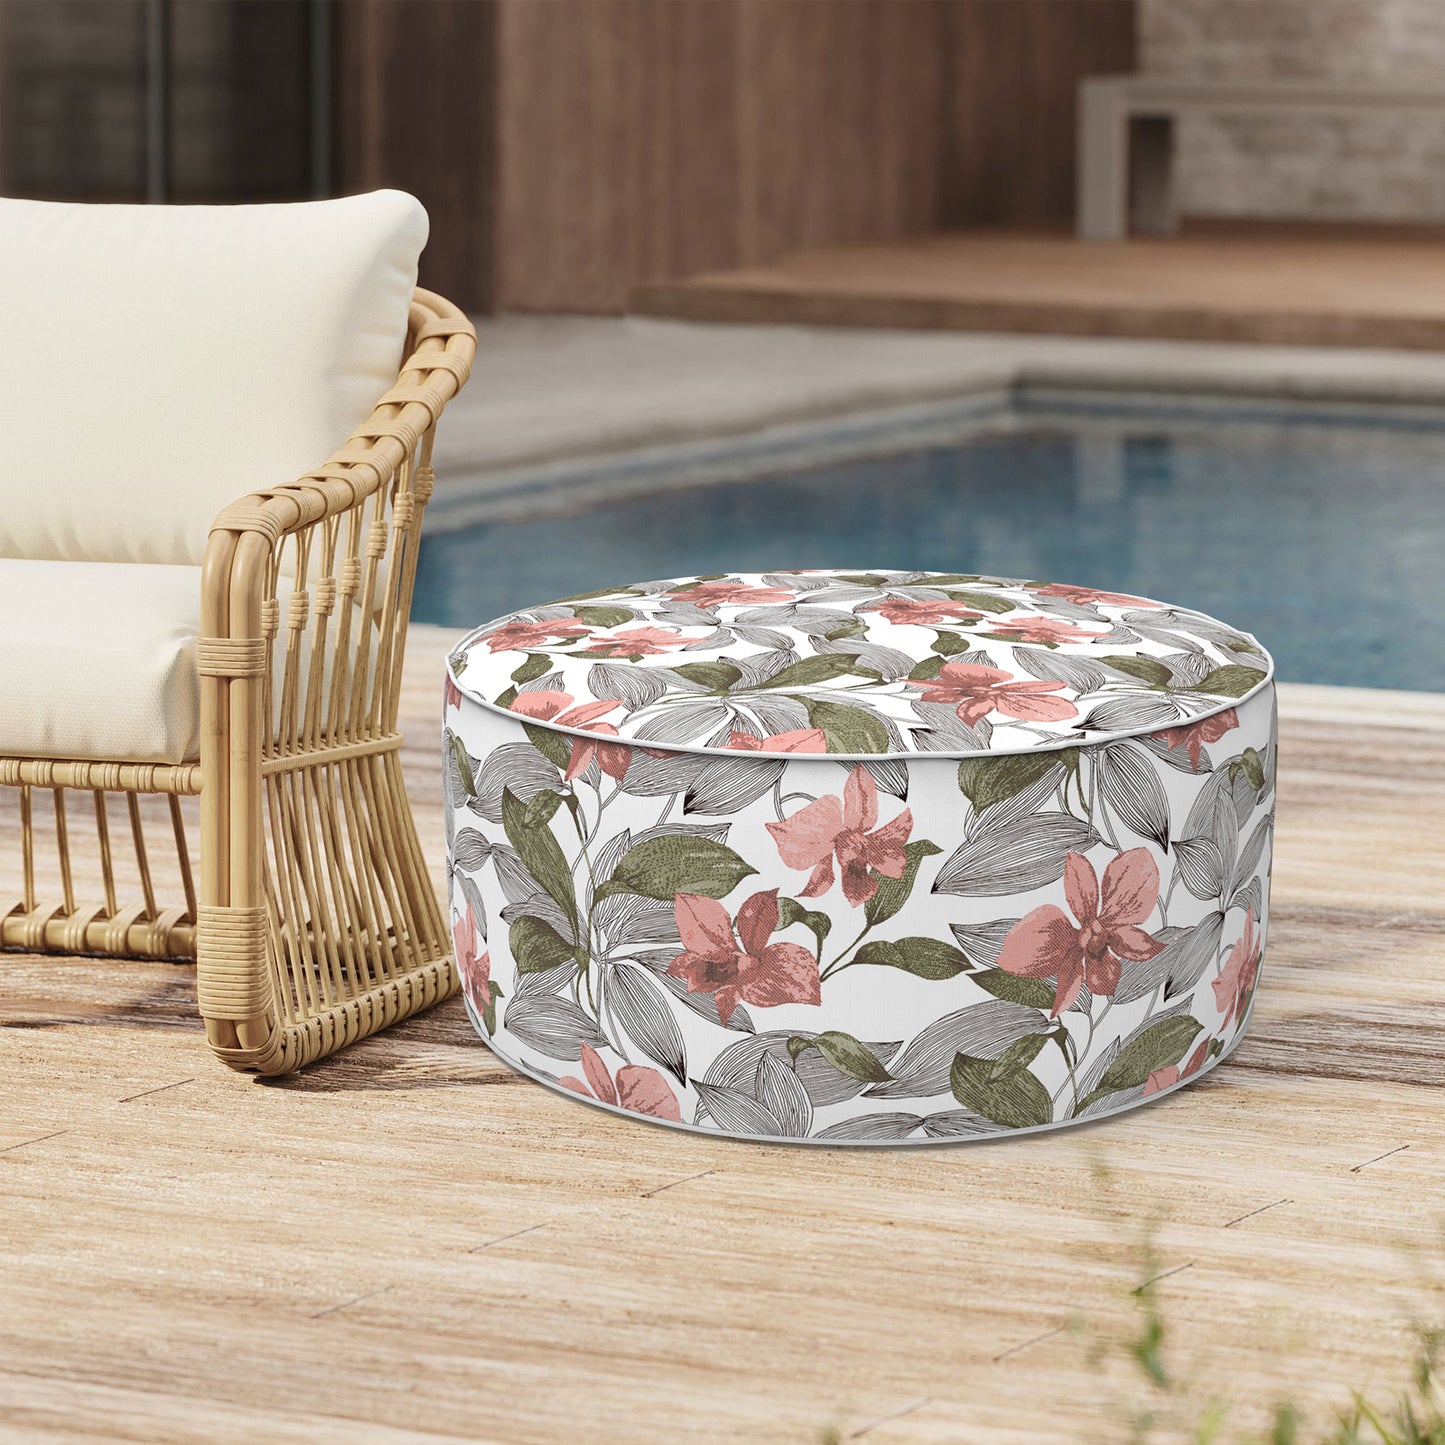 Outdoor Inflatable Stool Ottoman, All Weather Portable Footrest Stool, Furniture Stool Ottomans for Home Garden Beach, D31”xH14”, Clemens Noir Pink